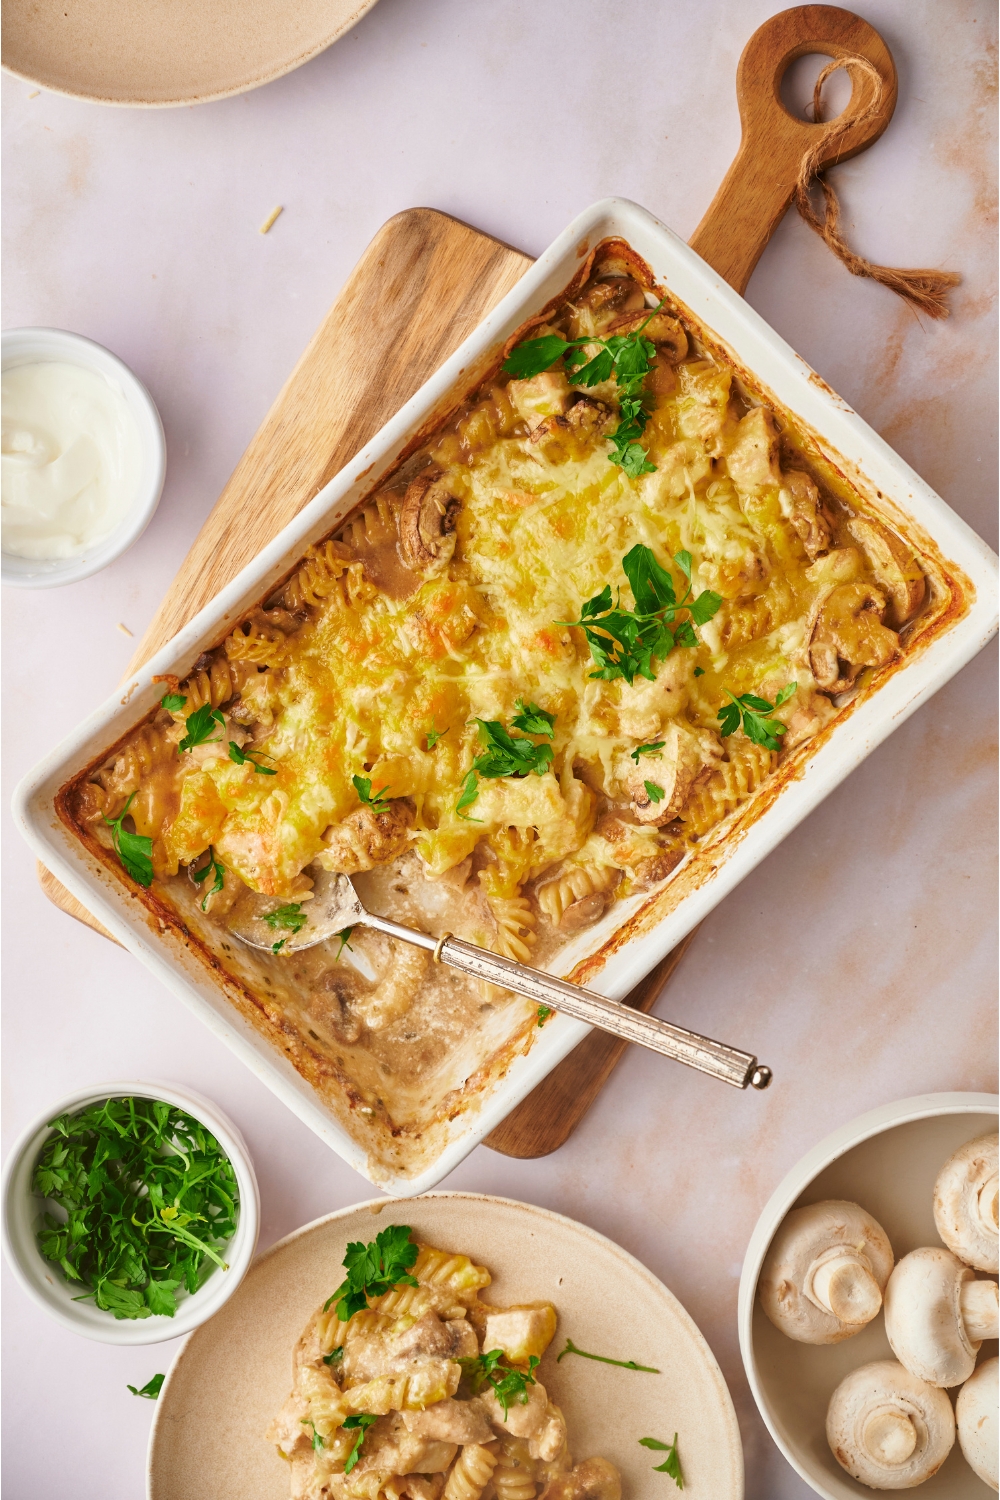 Chicken and mushroom casserole in a white baking dish on a wooden board. A serving has been scooped onto a plate and the serving spoon is in the casserole dish.